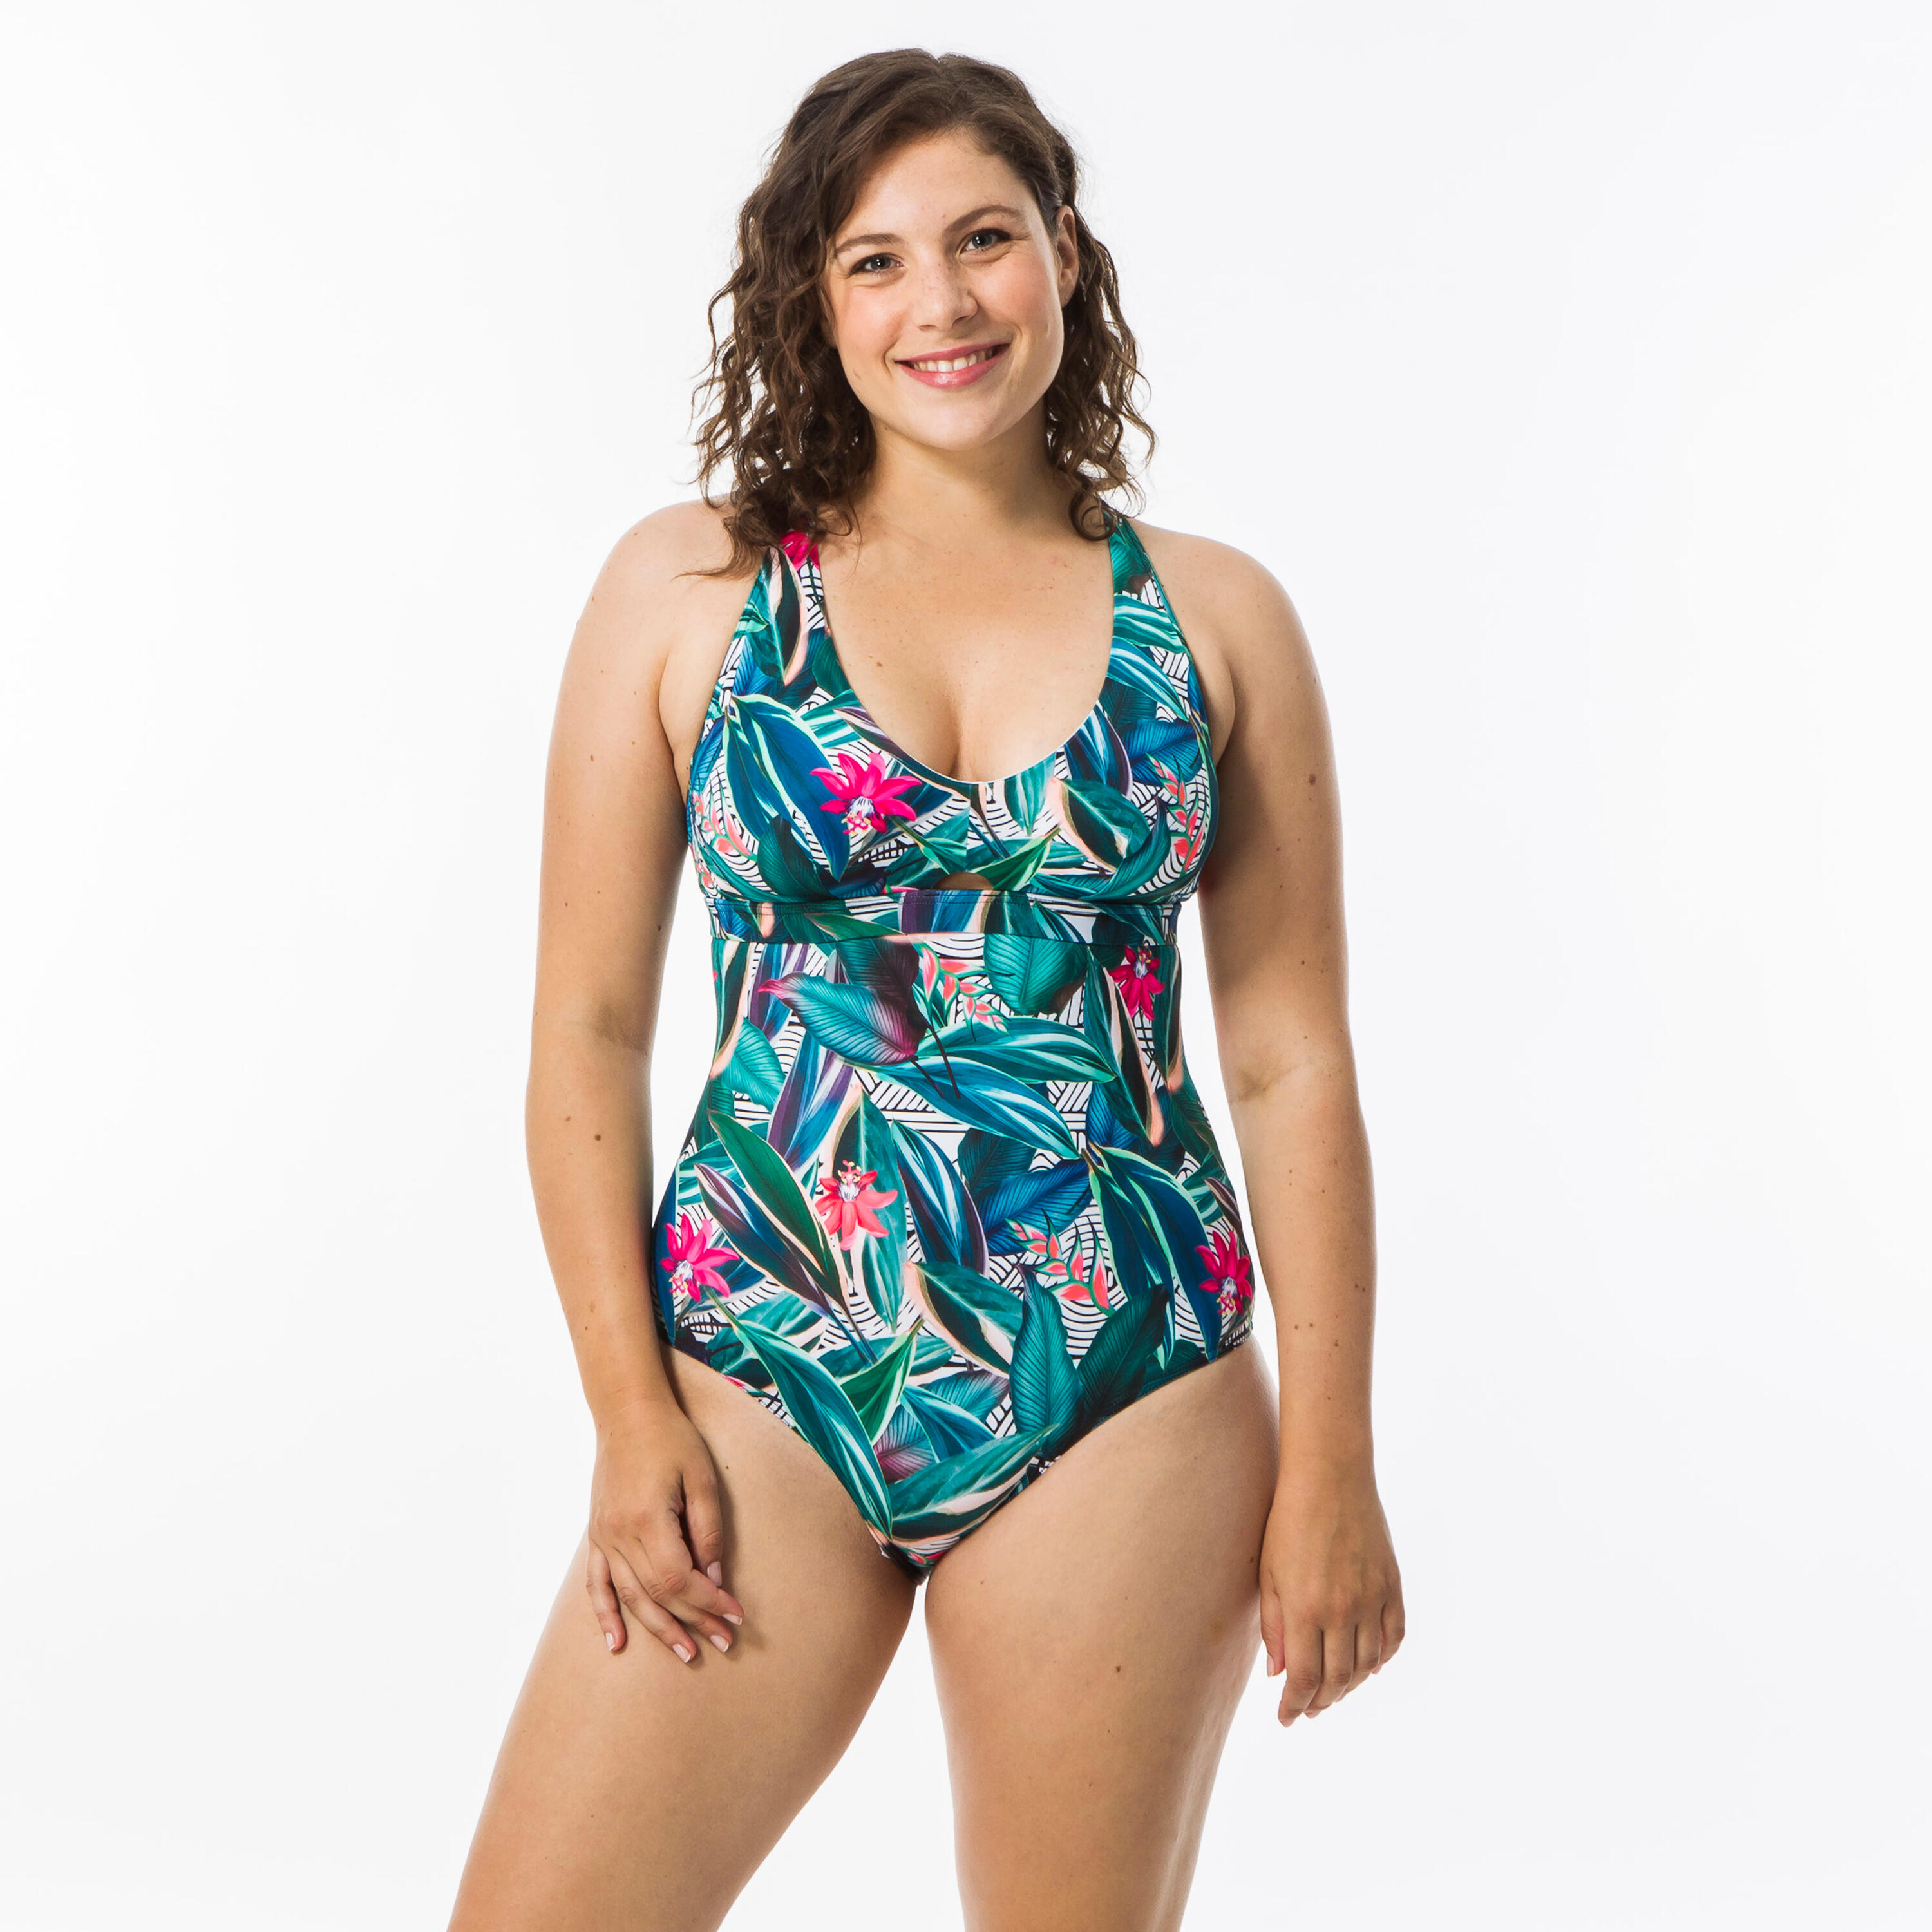 OLAIAN Women’s ONE-PIECE swimsuit with double back adjustment AGATHA PAGI